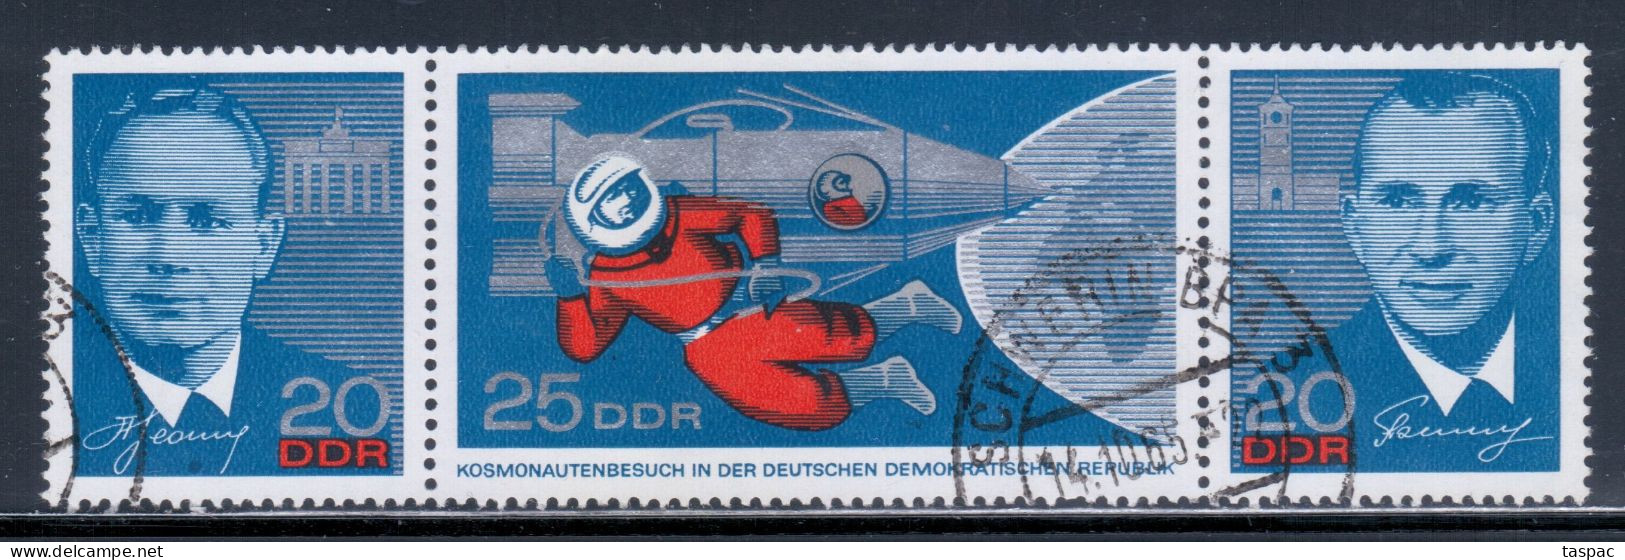 East Germany / DDR 1965 Mi# 1138-1140 Used - Strip Of 3 - Visit Of The Russian Cosmonauts / Space - Gebraucht